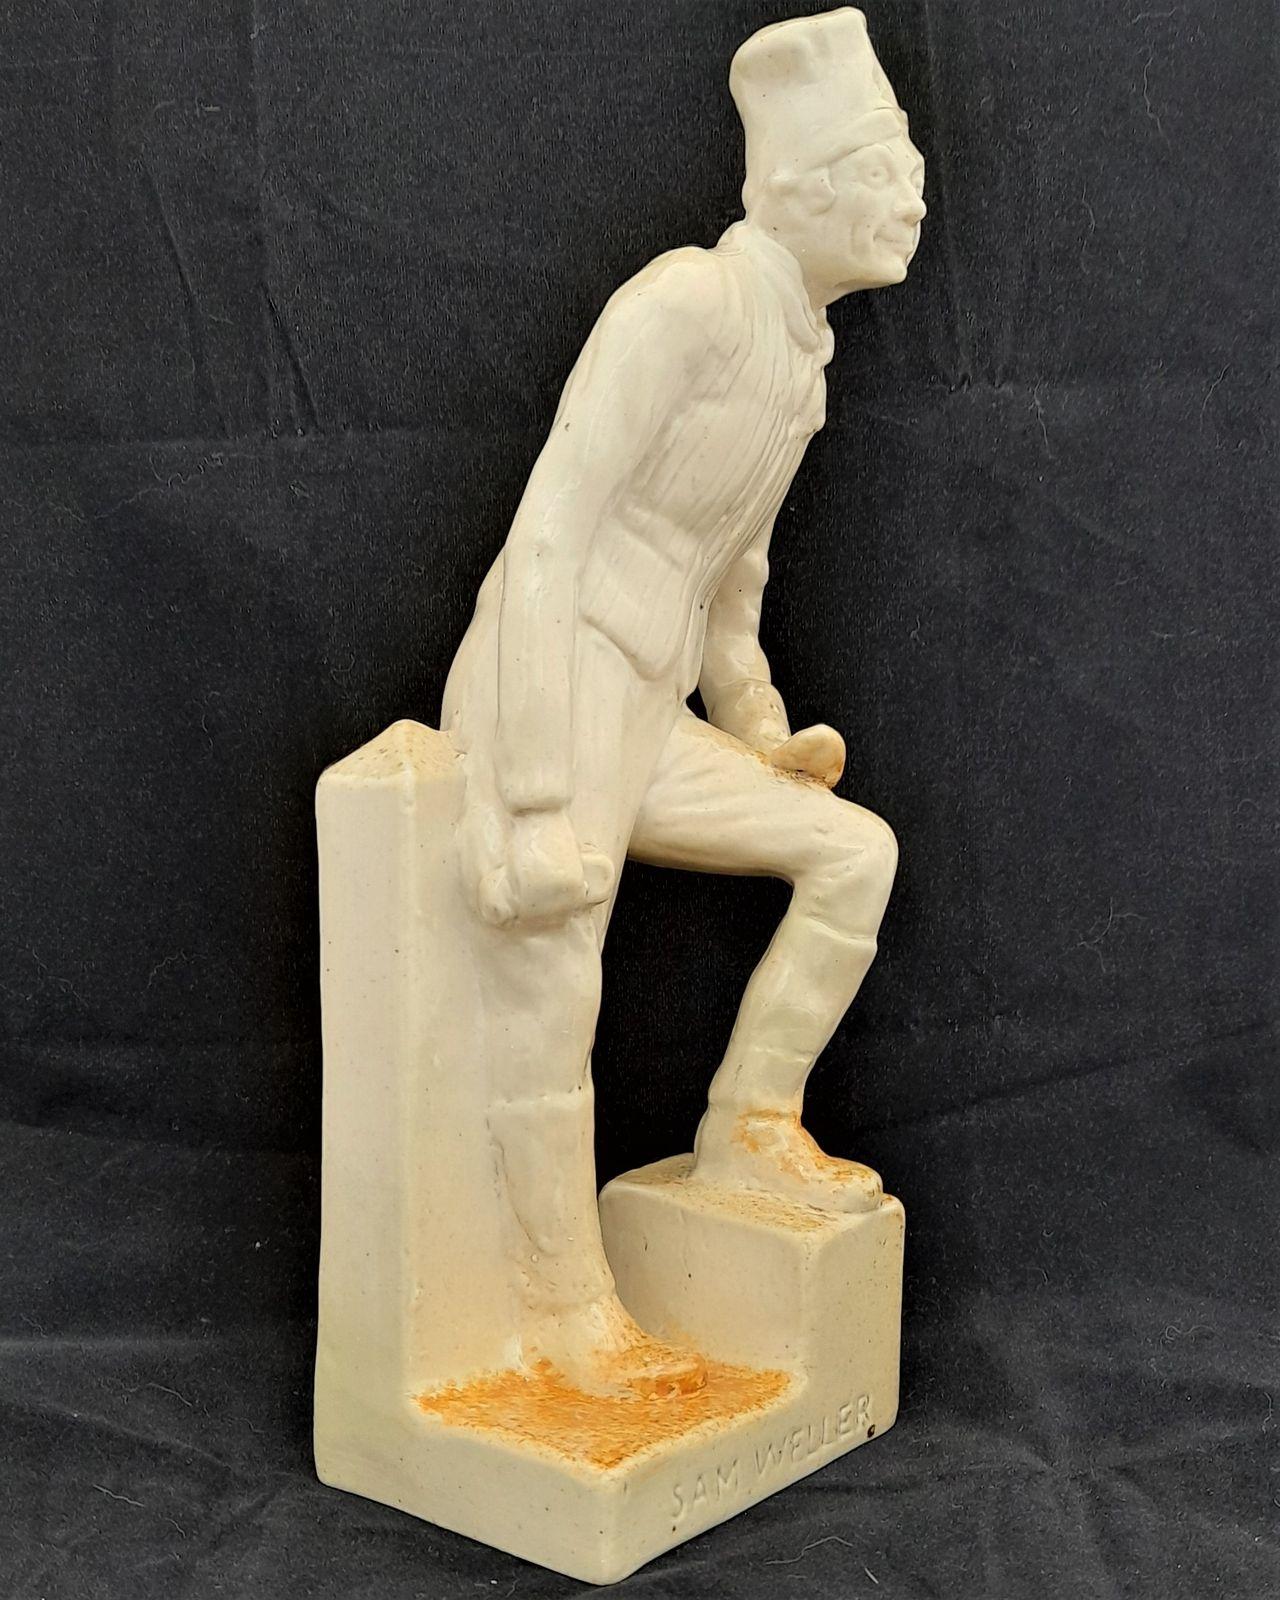 A rare antique buff coloured stoneware Royal Doulton Lambeth figurine model H 23 by Leslie Harradine modelled in 1912 - depicting Sam Weller from the novel Pickwick Papers by Charles Dickens